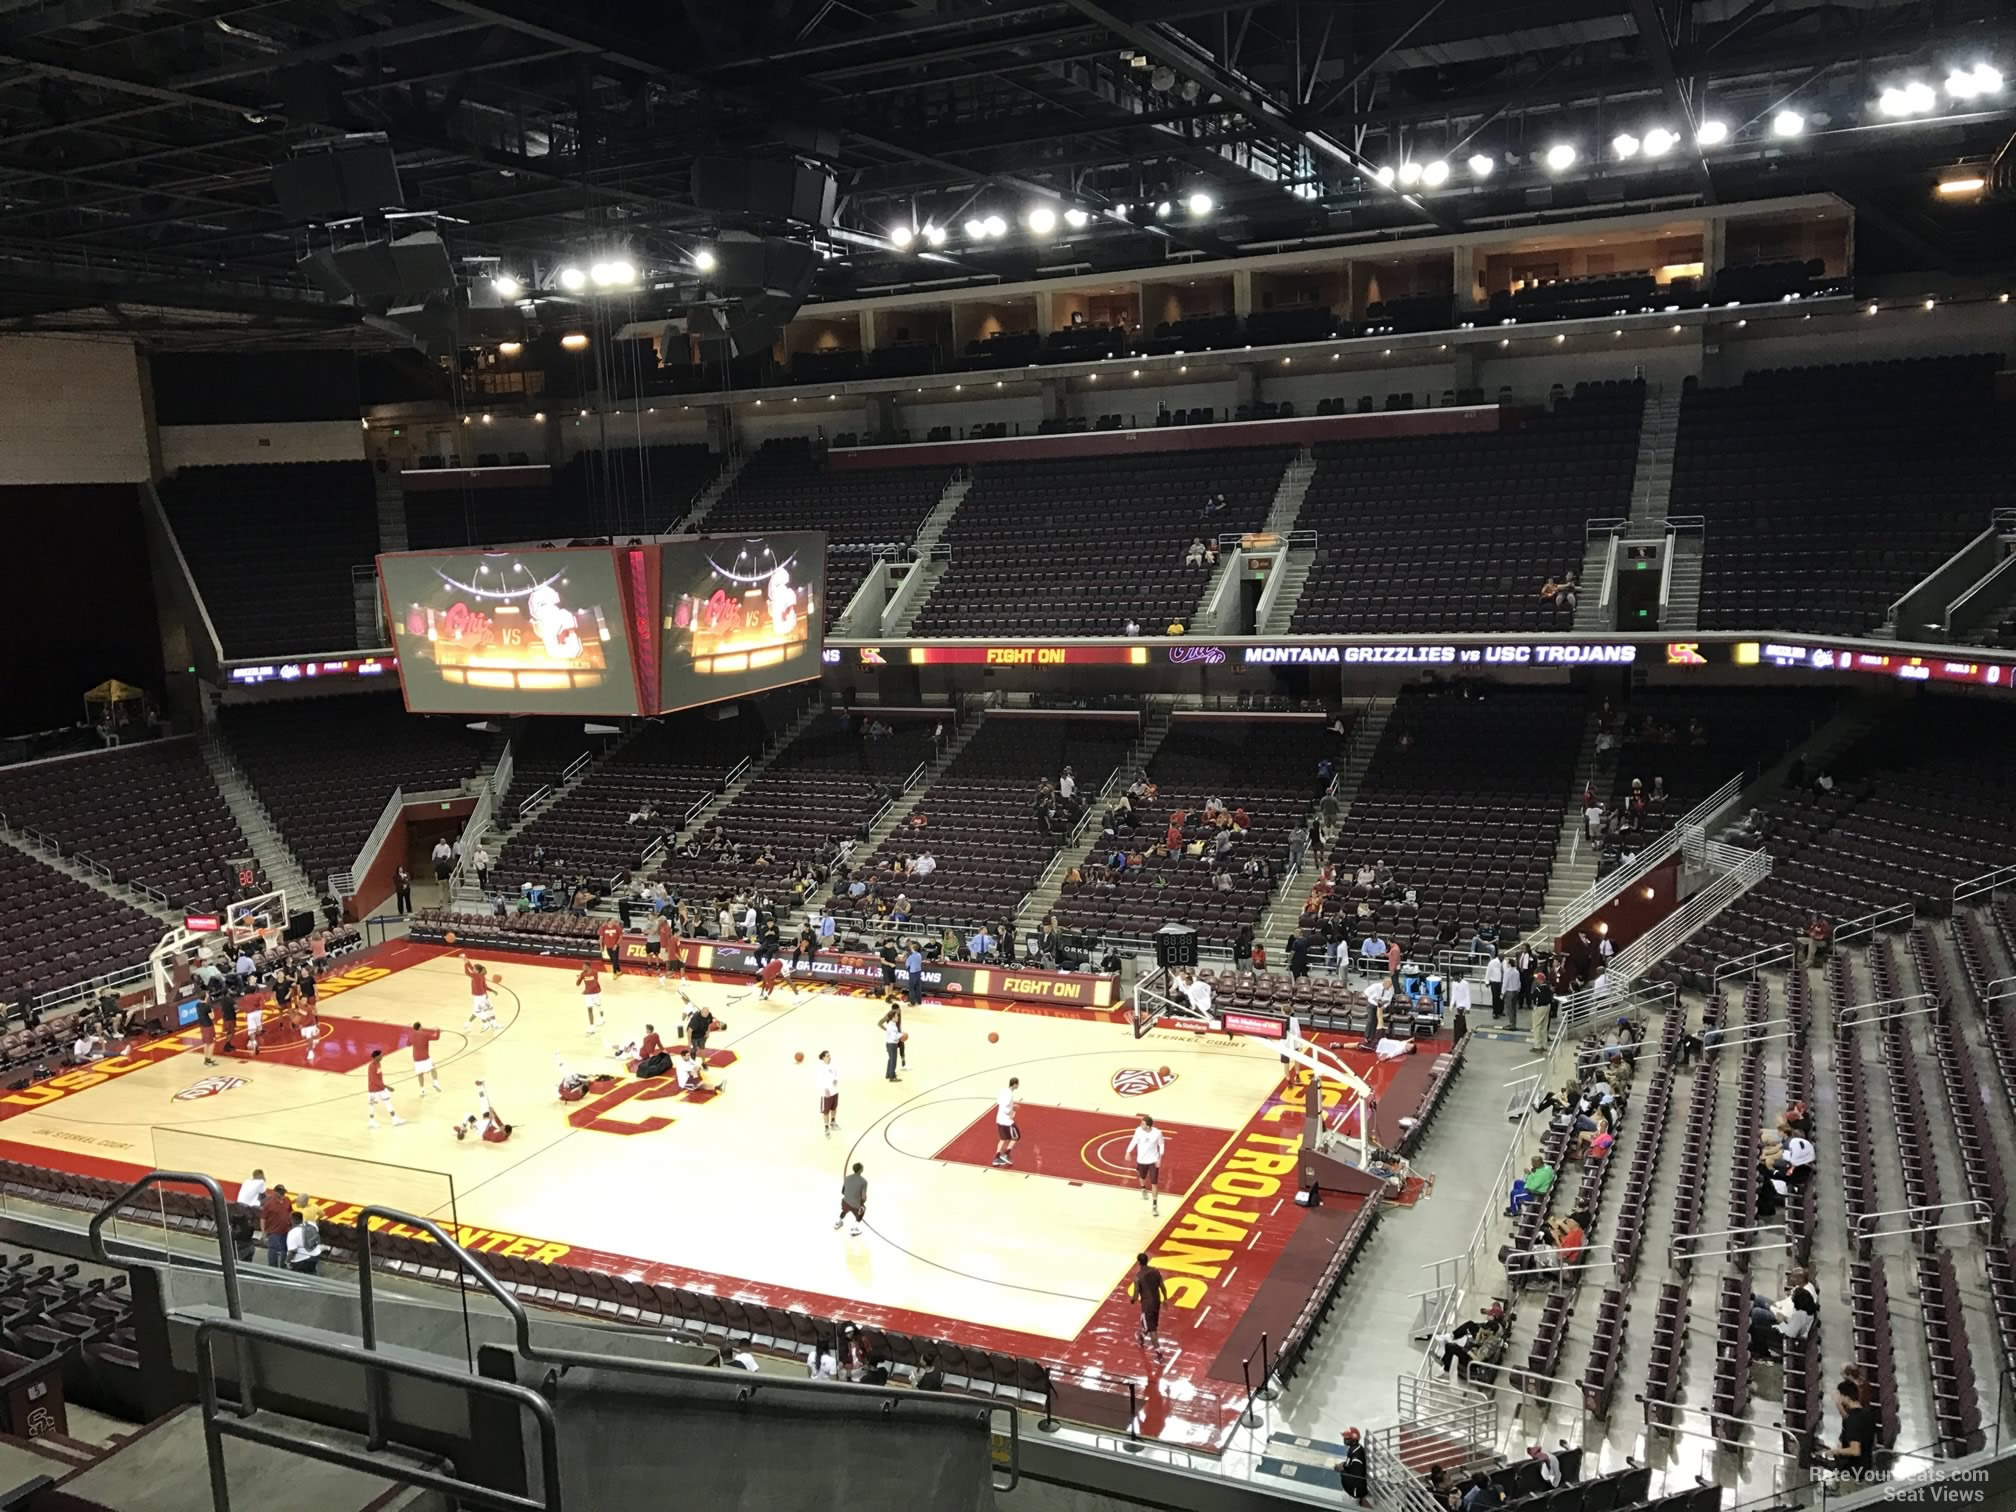 section 207, row 10 seat view  - galen center